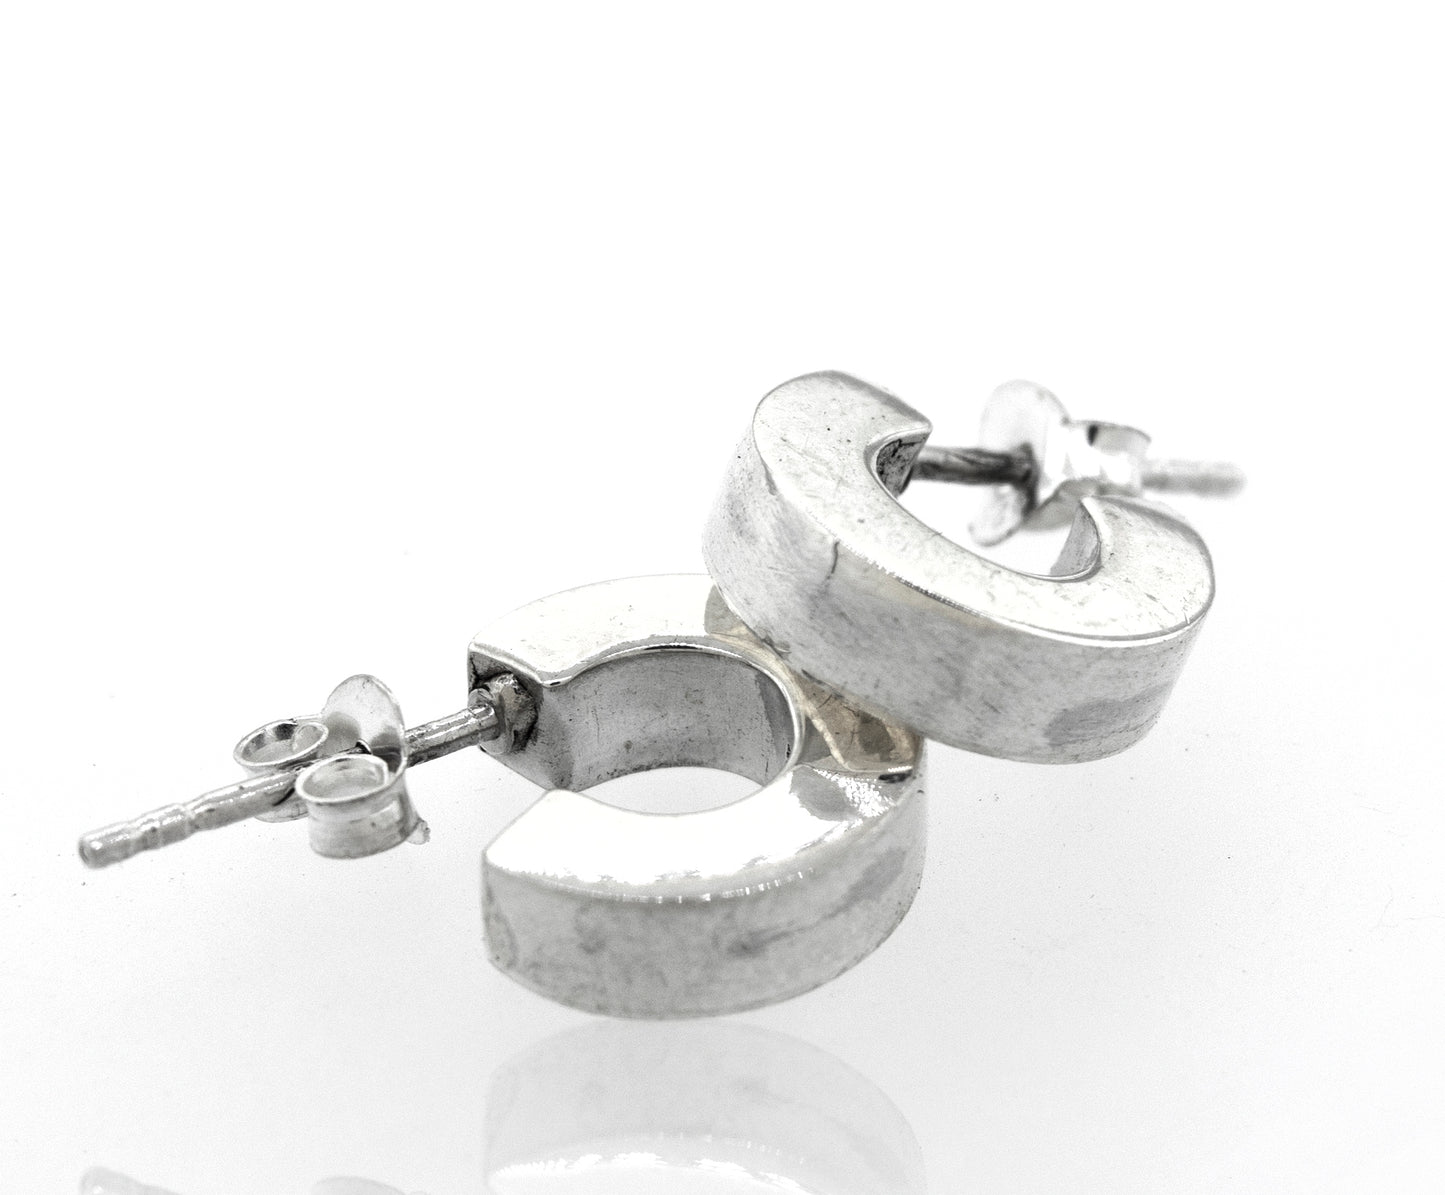 A pair of Super Silver Sterling Silver Half Hoop Stud Earrings on a white surface.